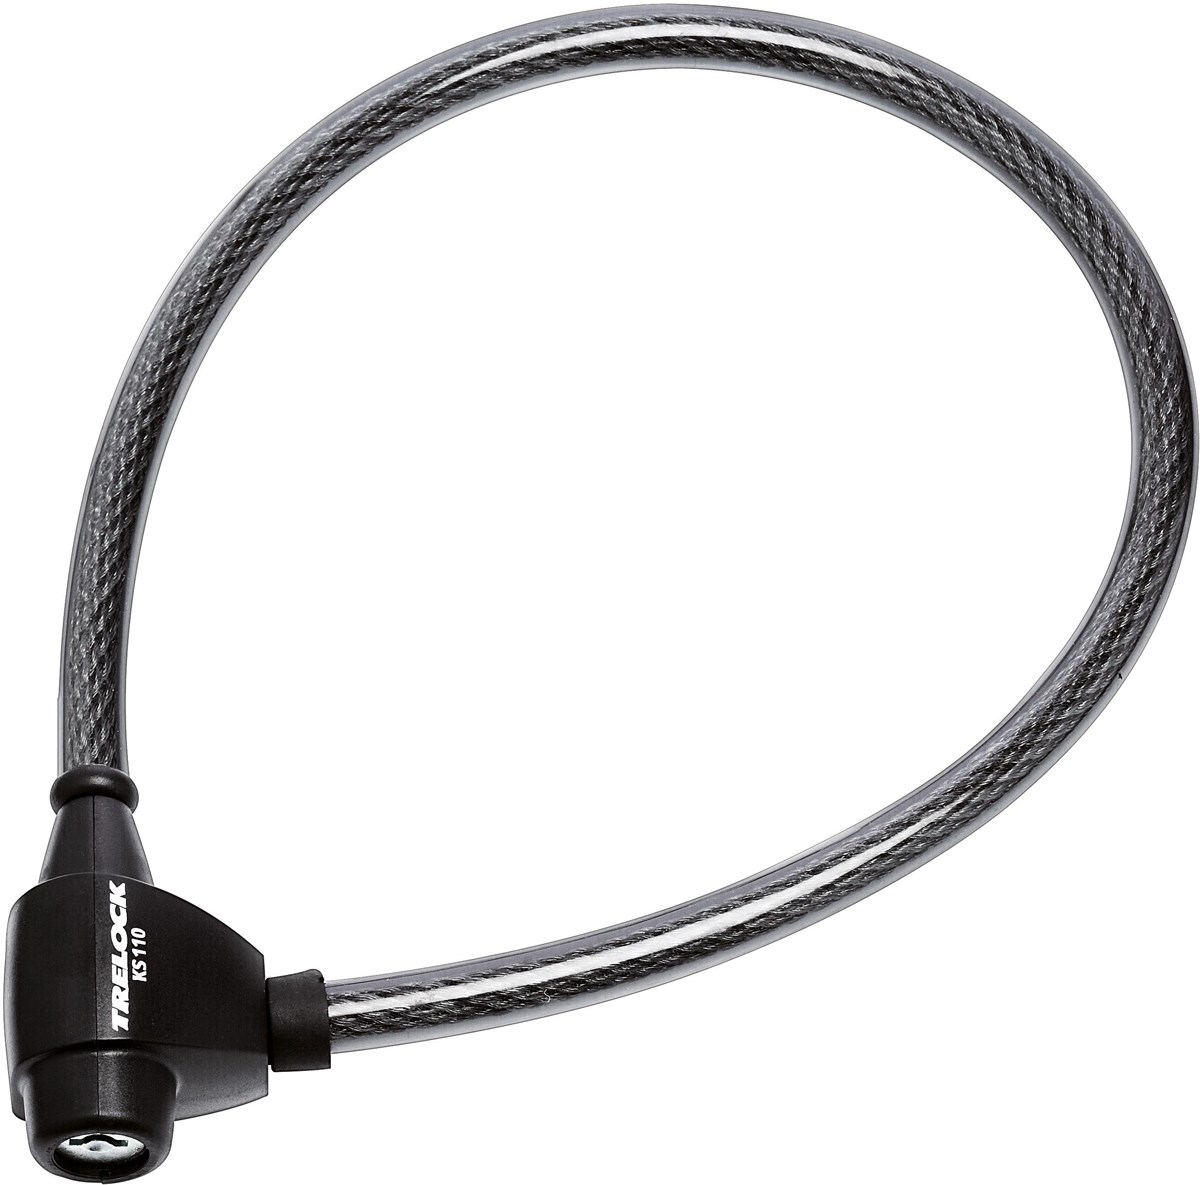 Tre-Lock Security Cable KS110 product image